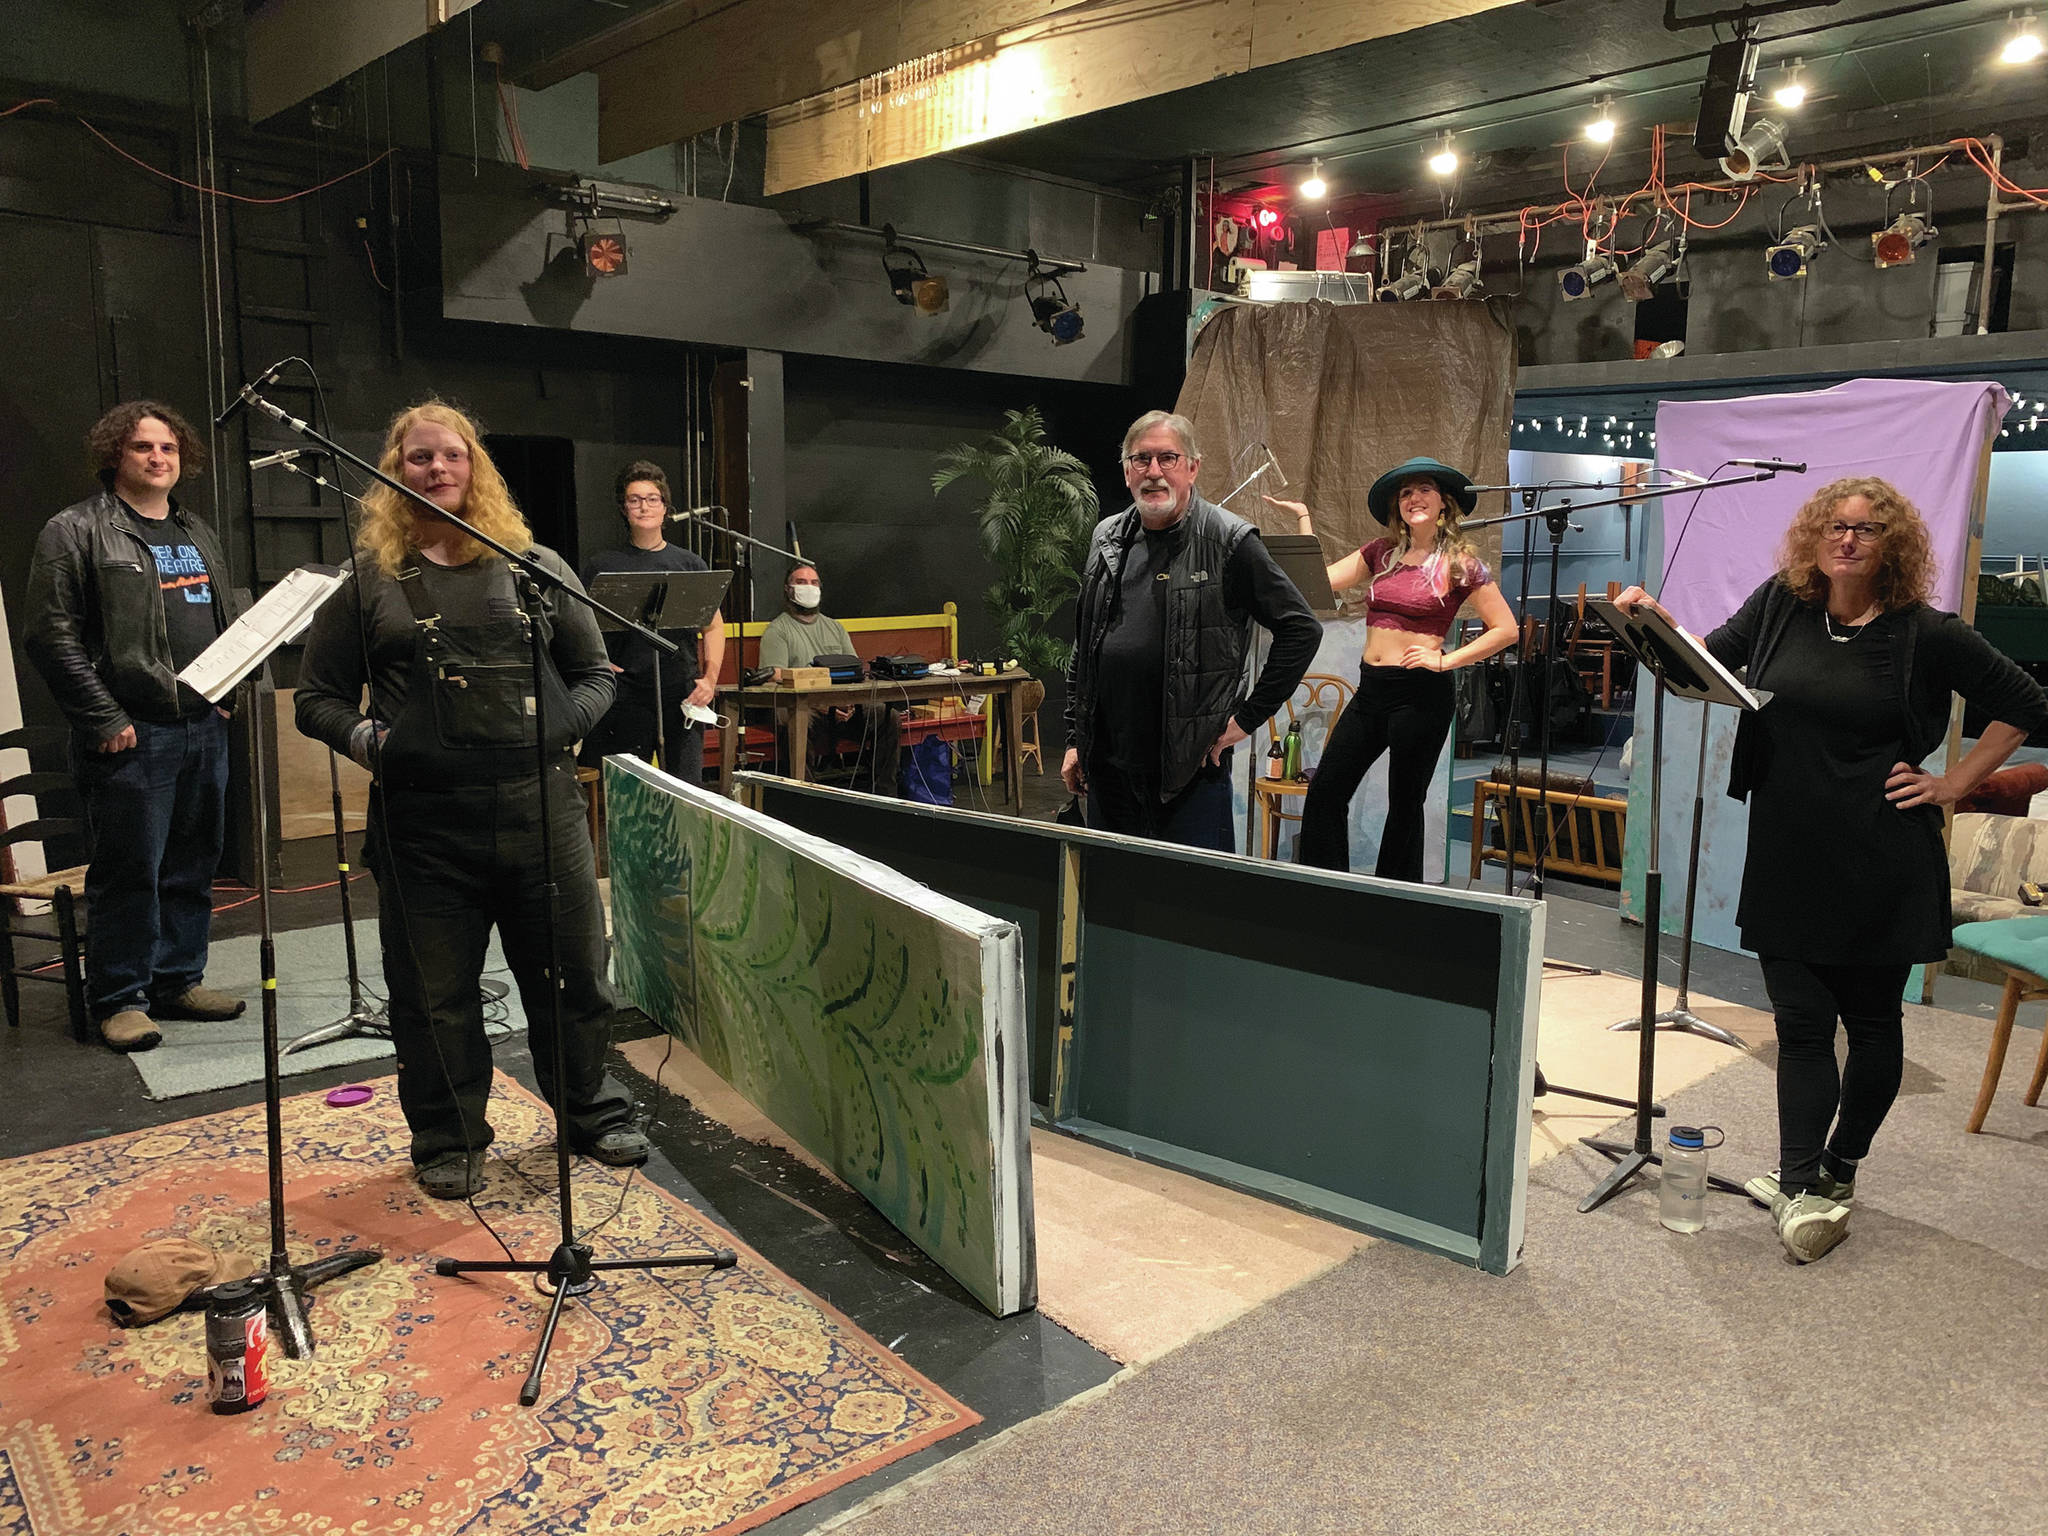 The cast and crew of “Knife Skills” poses for a photo at Pier One Theatre during a recording session in August in Homer, Alaska. From left to right are Peter Sheppard, Theodore Castellani, Chloë Pleznac, Joshua Krohn (sitting, at sound board), Darrel Oliver, Helen-Thea Marcus and Ingrid Harrald. (Photo courtesy of Lindsey Schneider)